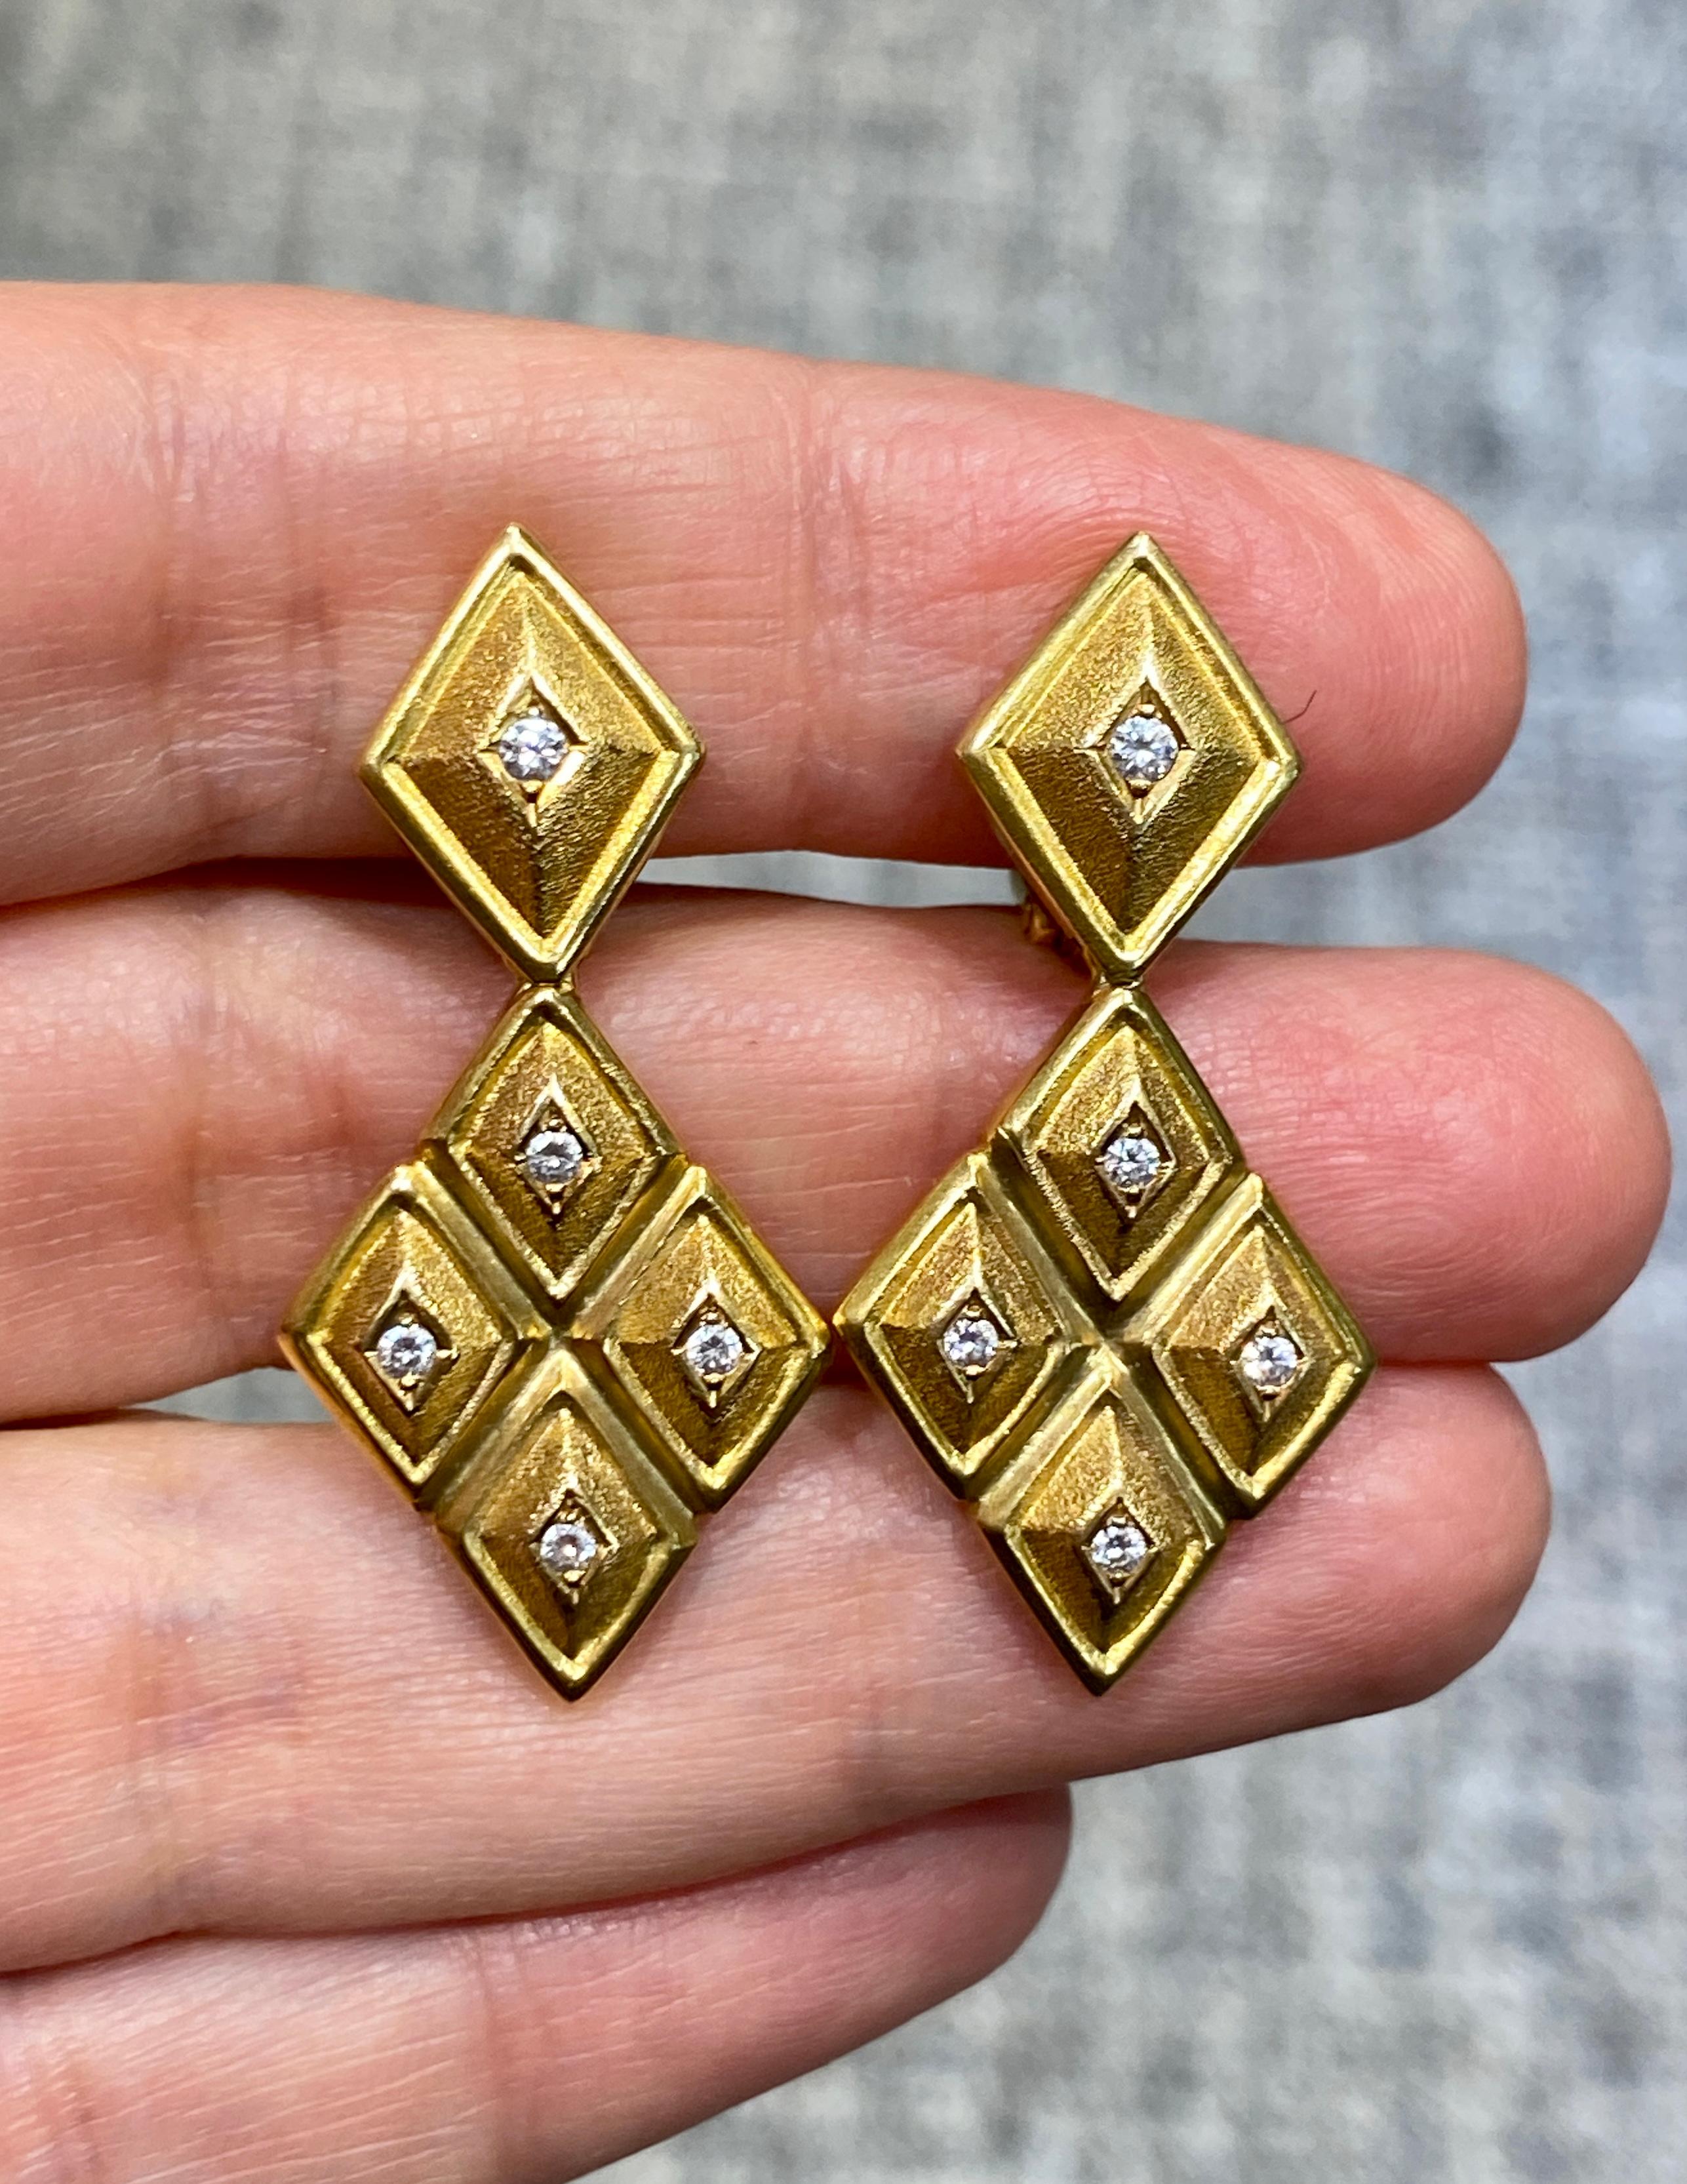 These striking Lalaounis earrings are made of 18k yellow gold and are adorned with small round cut diamonds. They are originally clip-on but a pin can easily be added for extra safety. Although chunky in appearance they are comfortable to wear.